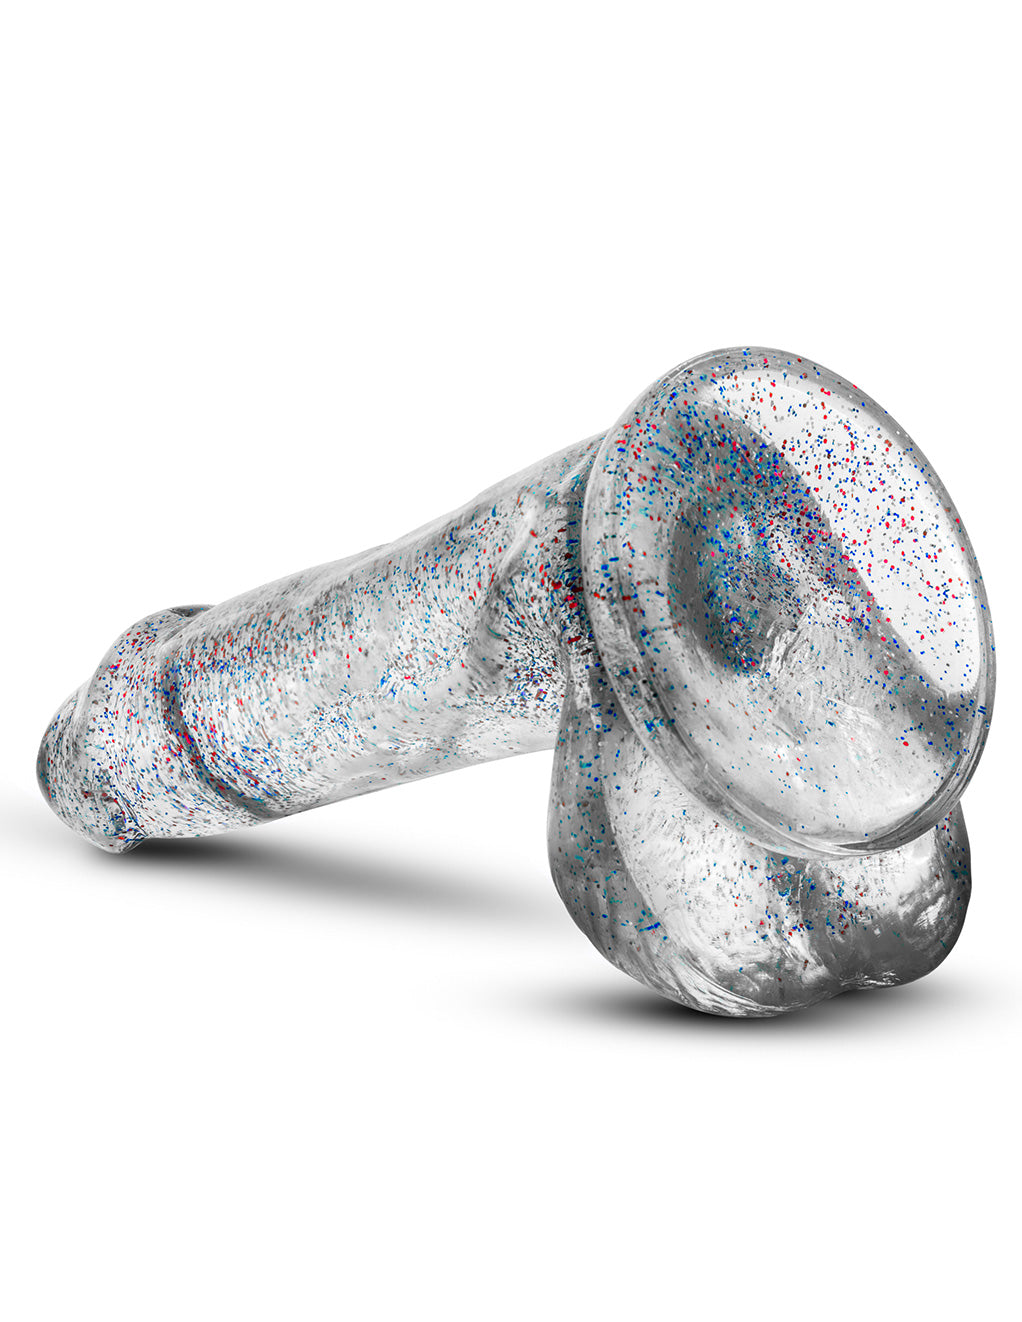 Naturally Yours by Blush Novelties 6 Inch Glitter Cock